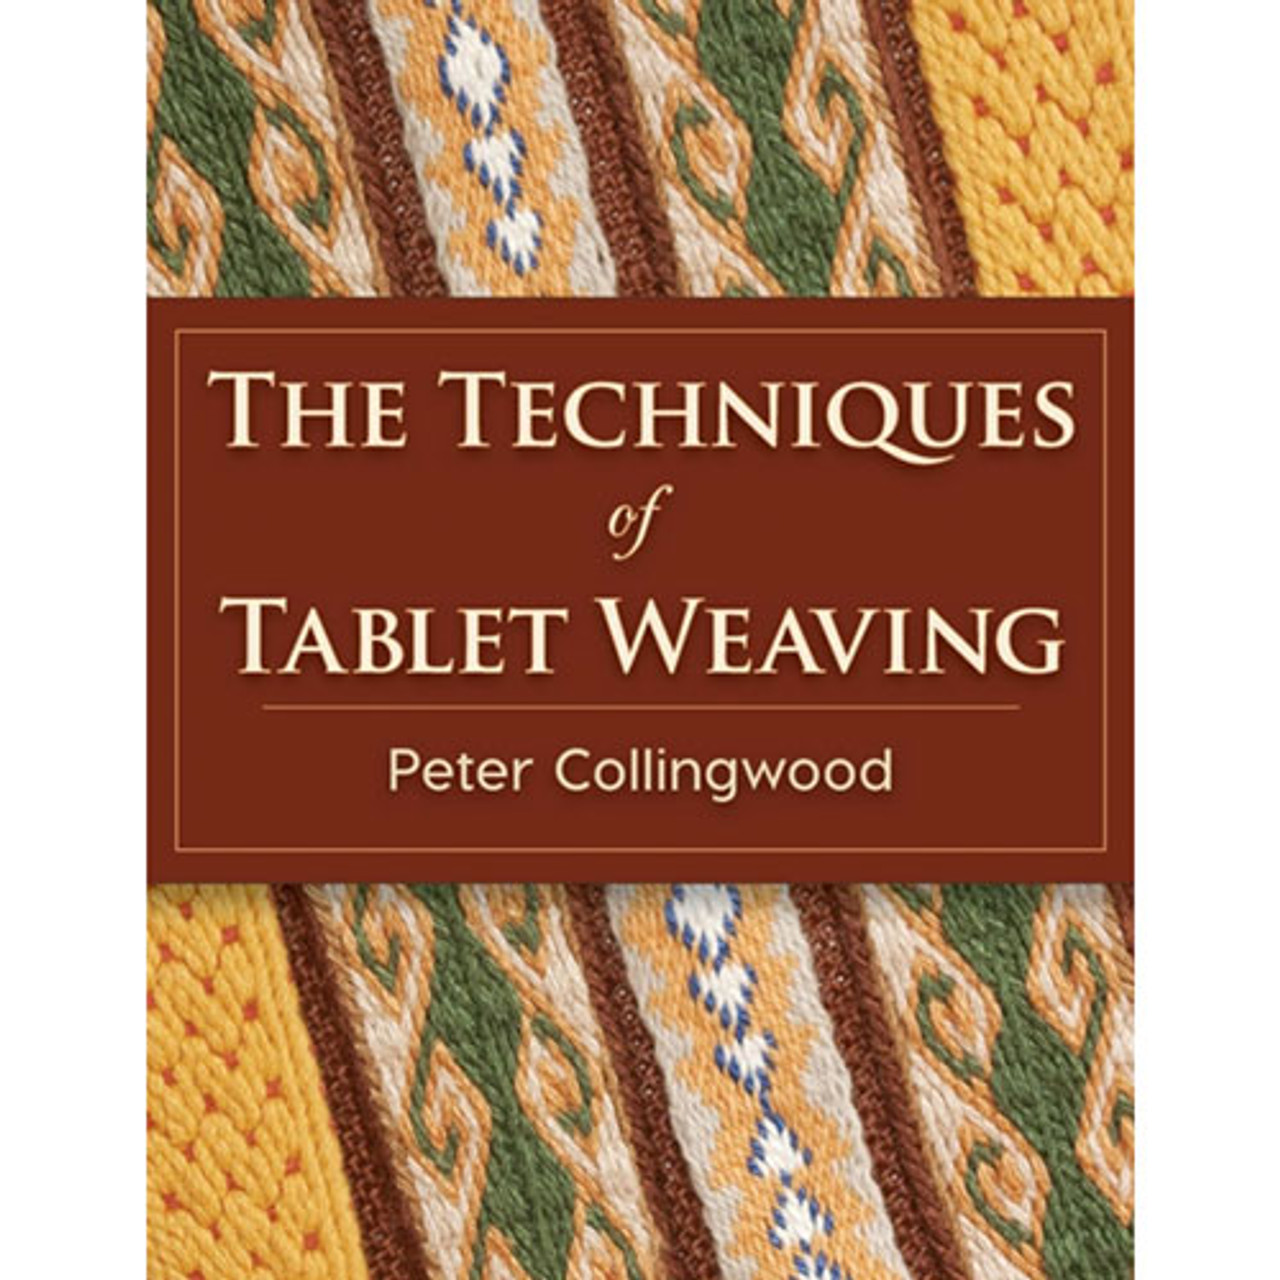 Yarn and Kits for Tablet Weaving